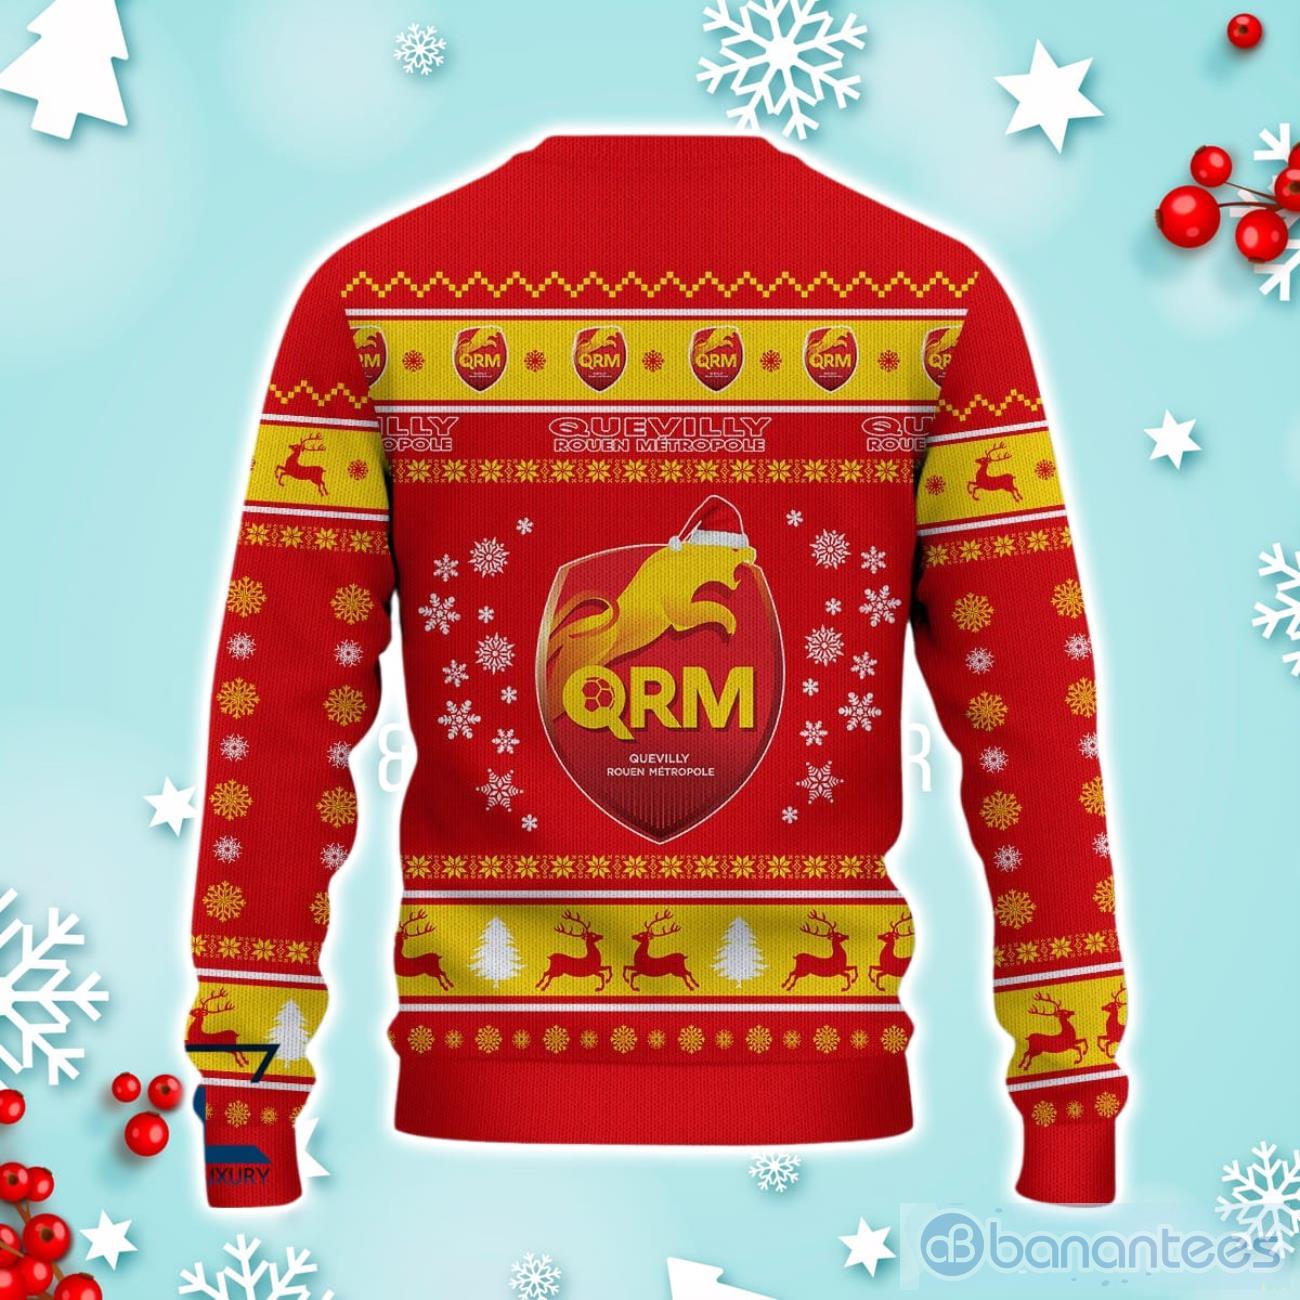 Quevilly Rouen Metropole Ugly Christmas Sweater Ideal Gift For